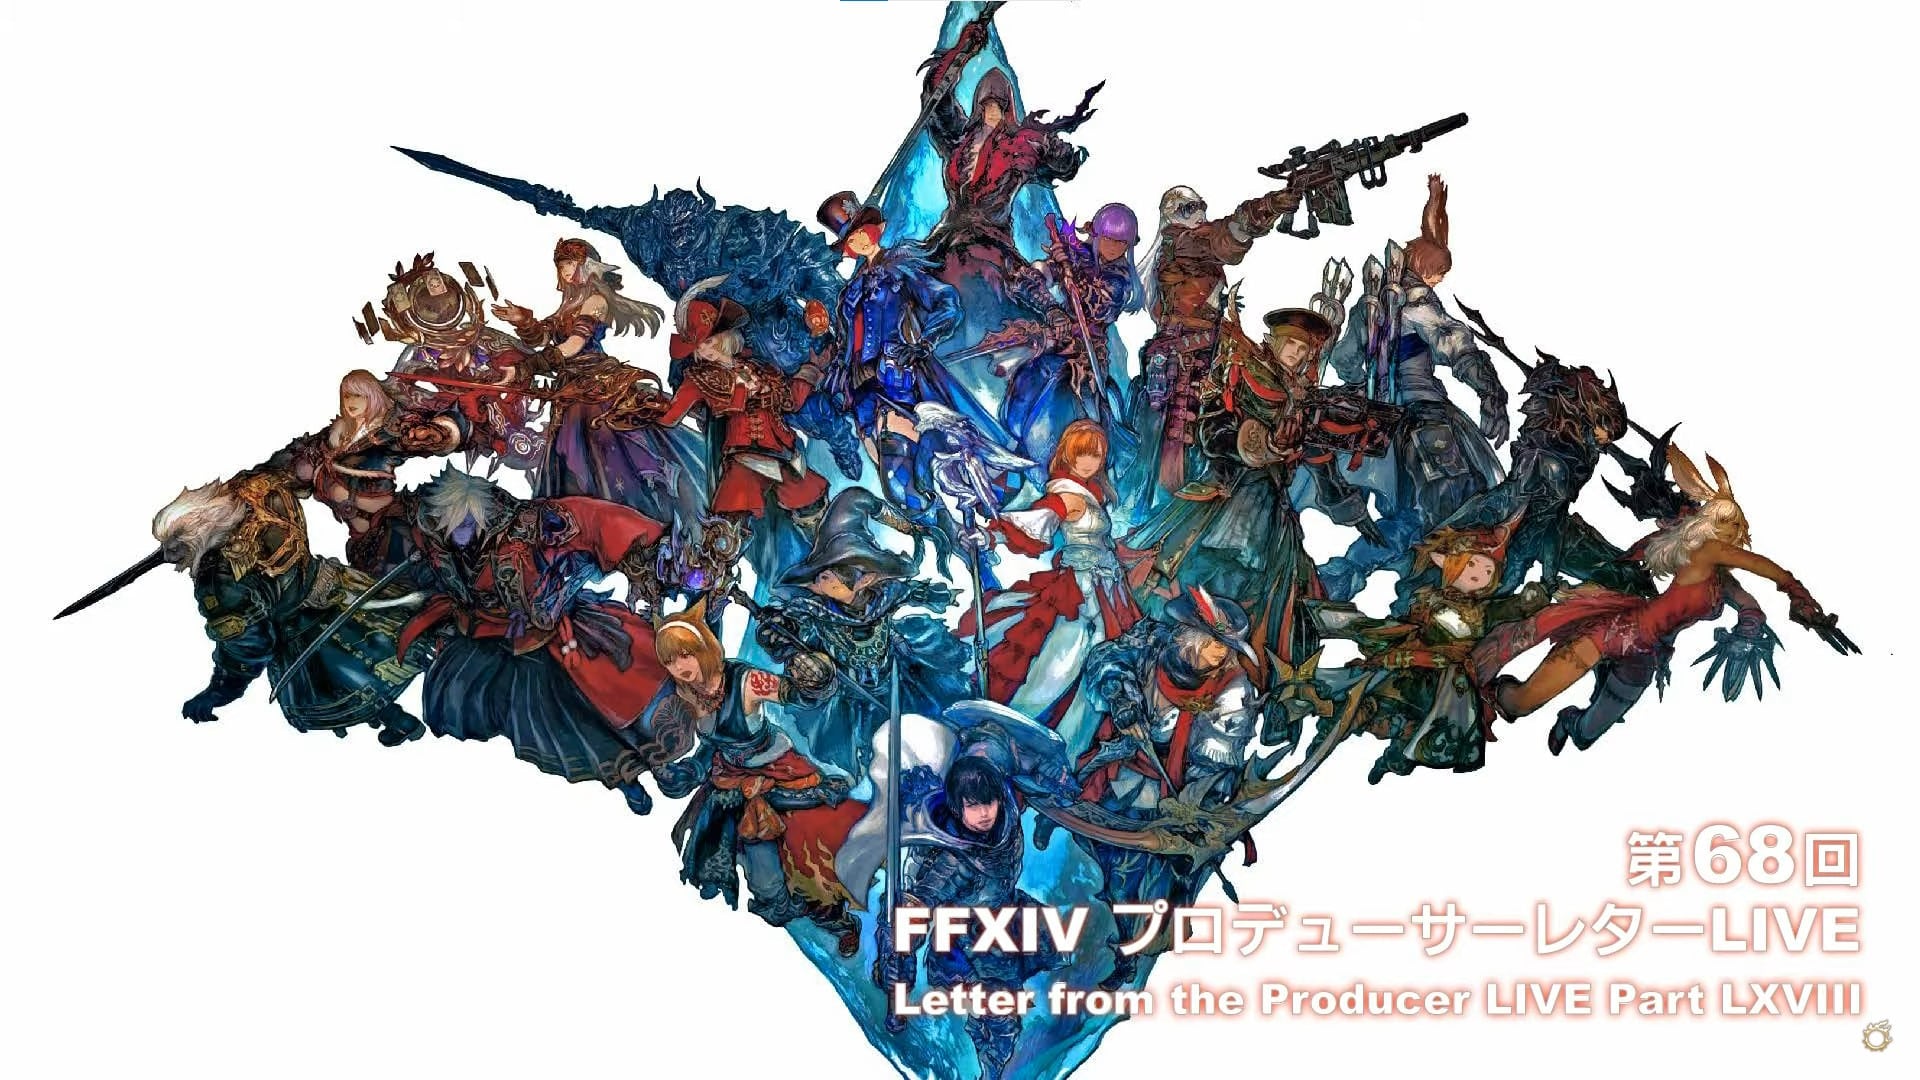 The key art for the FFXIV Live Letter 68.